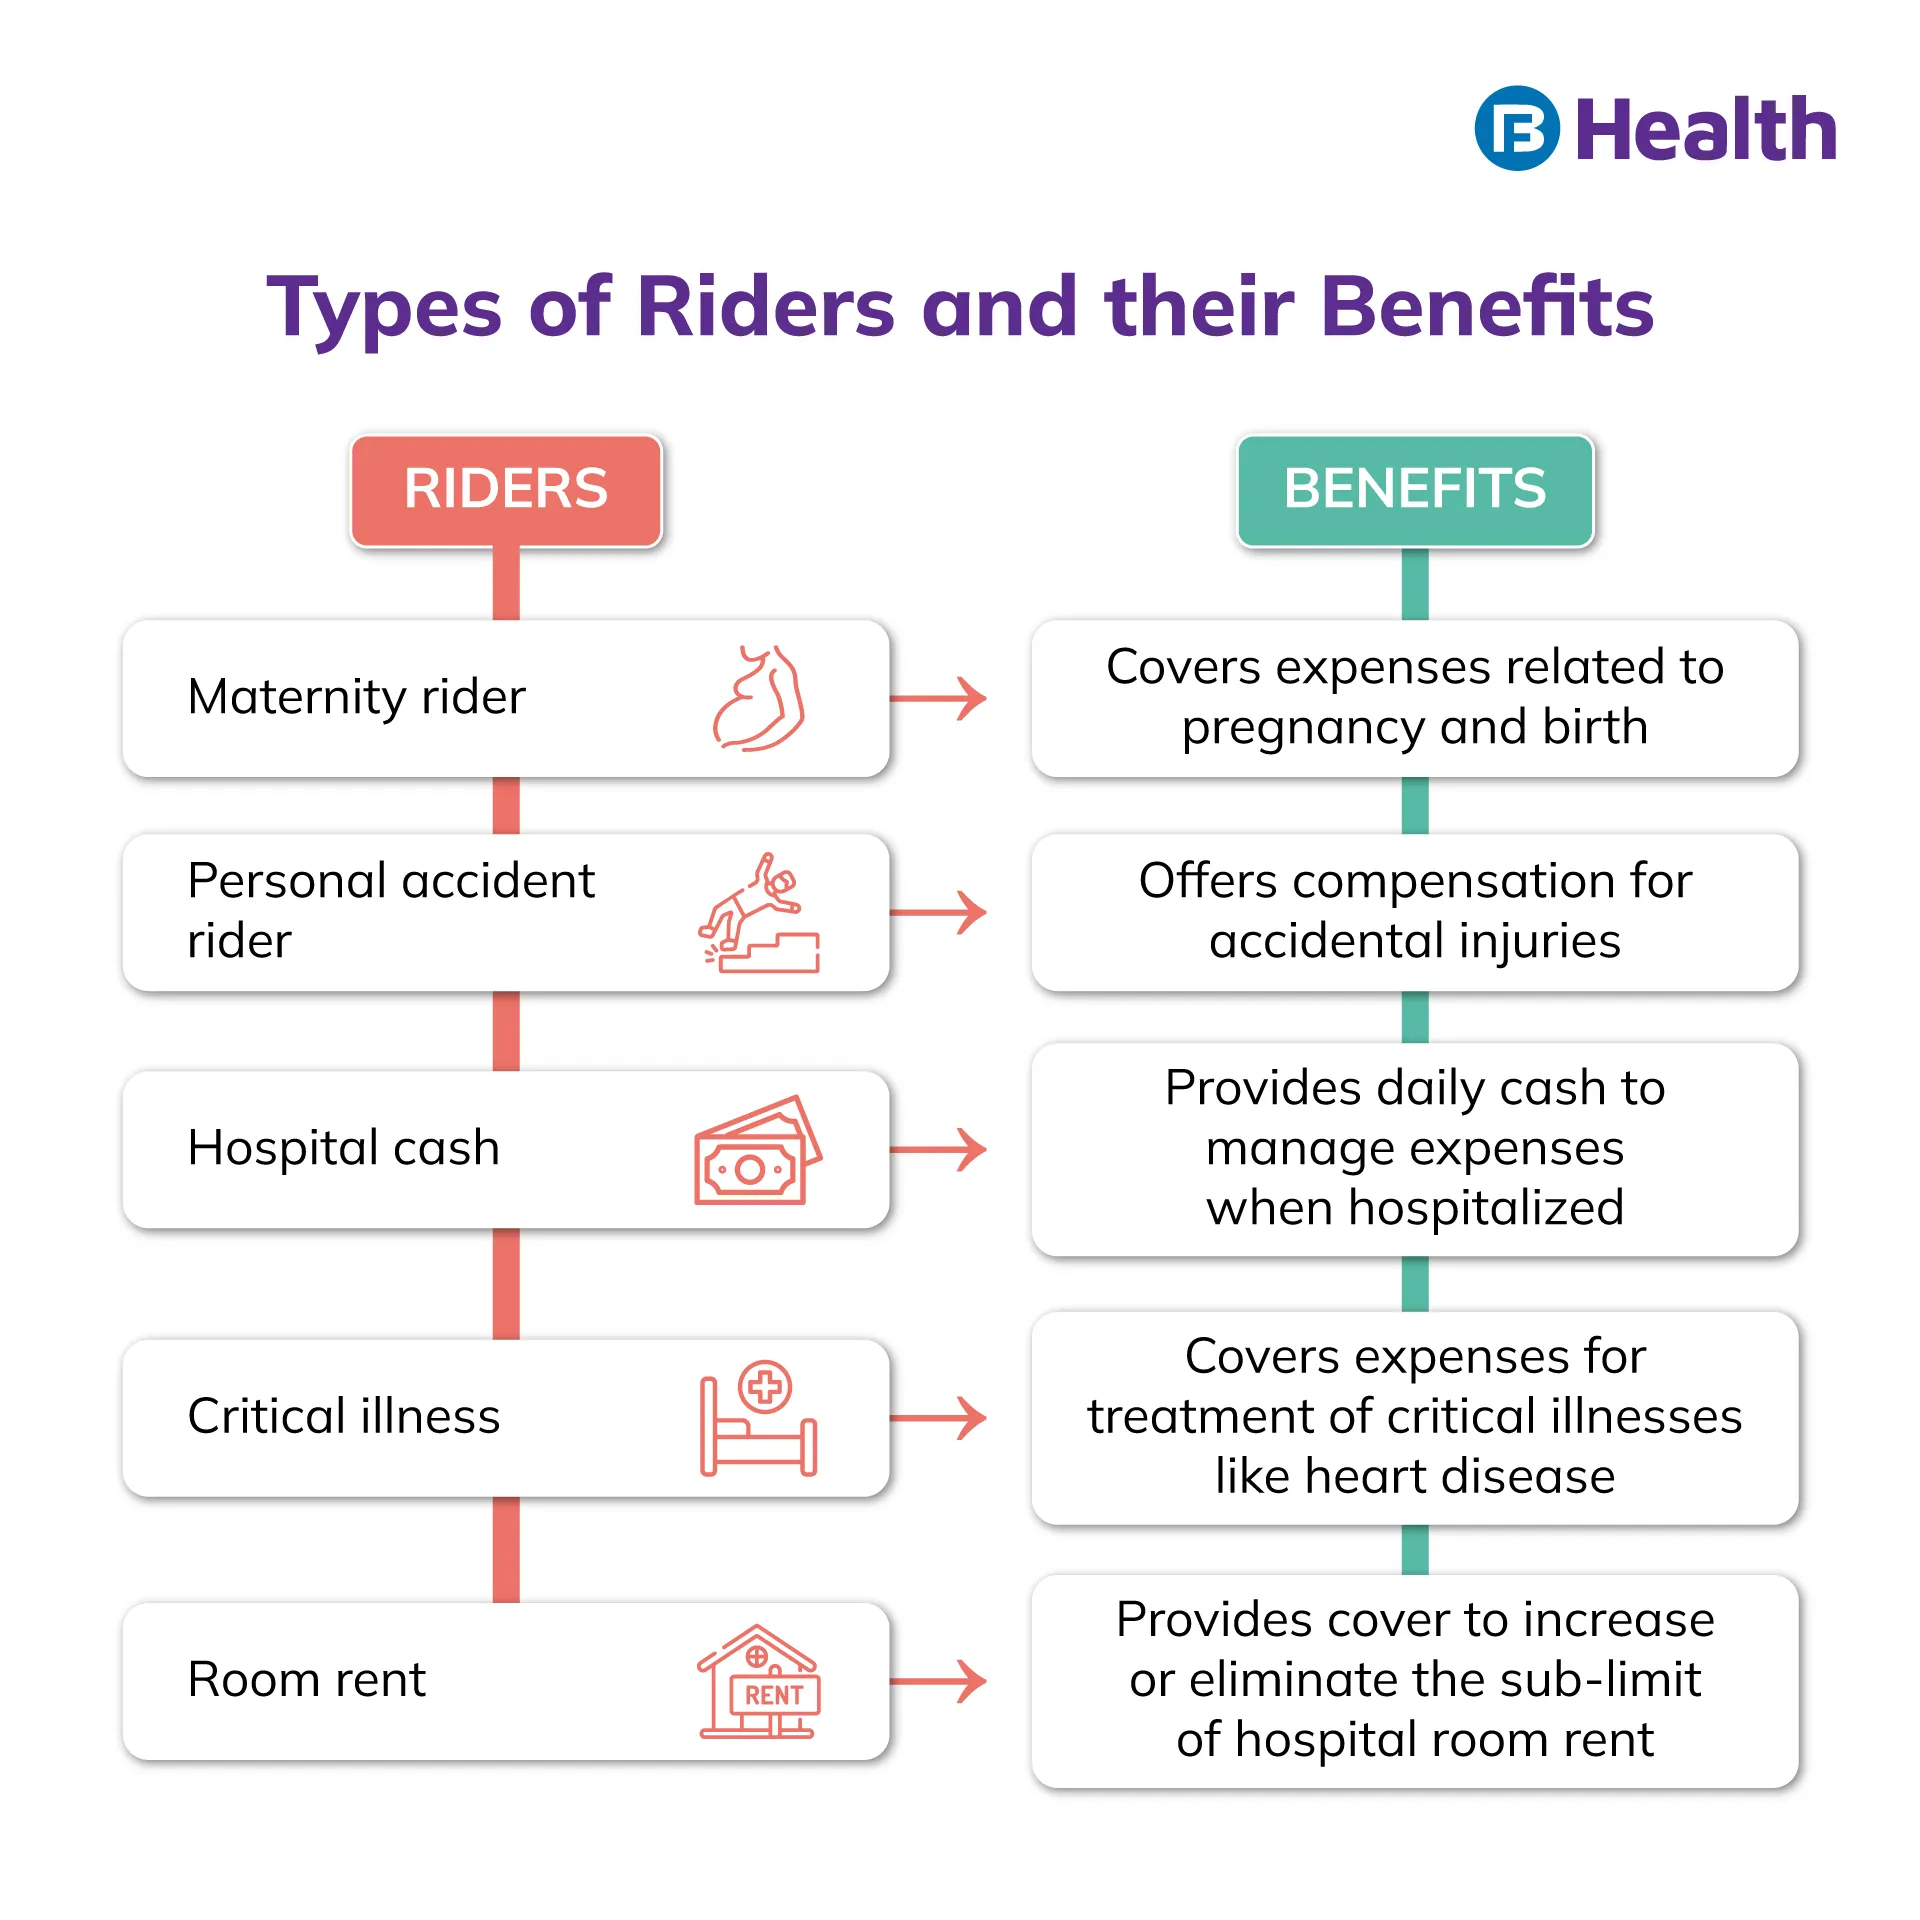 types and benefits of riders